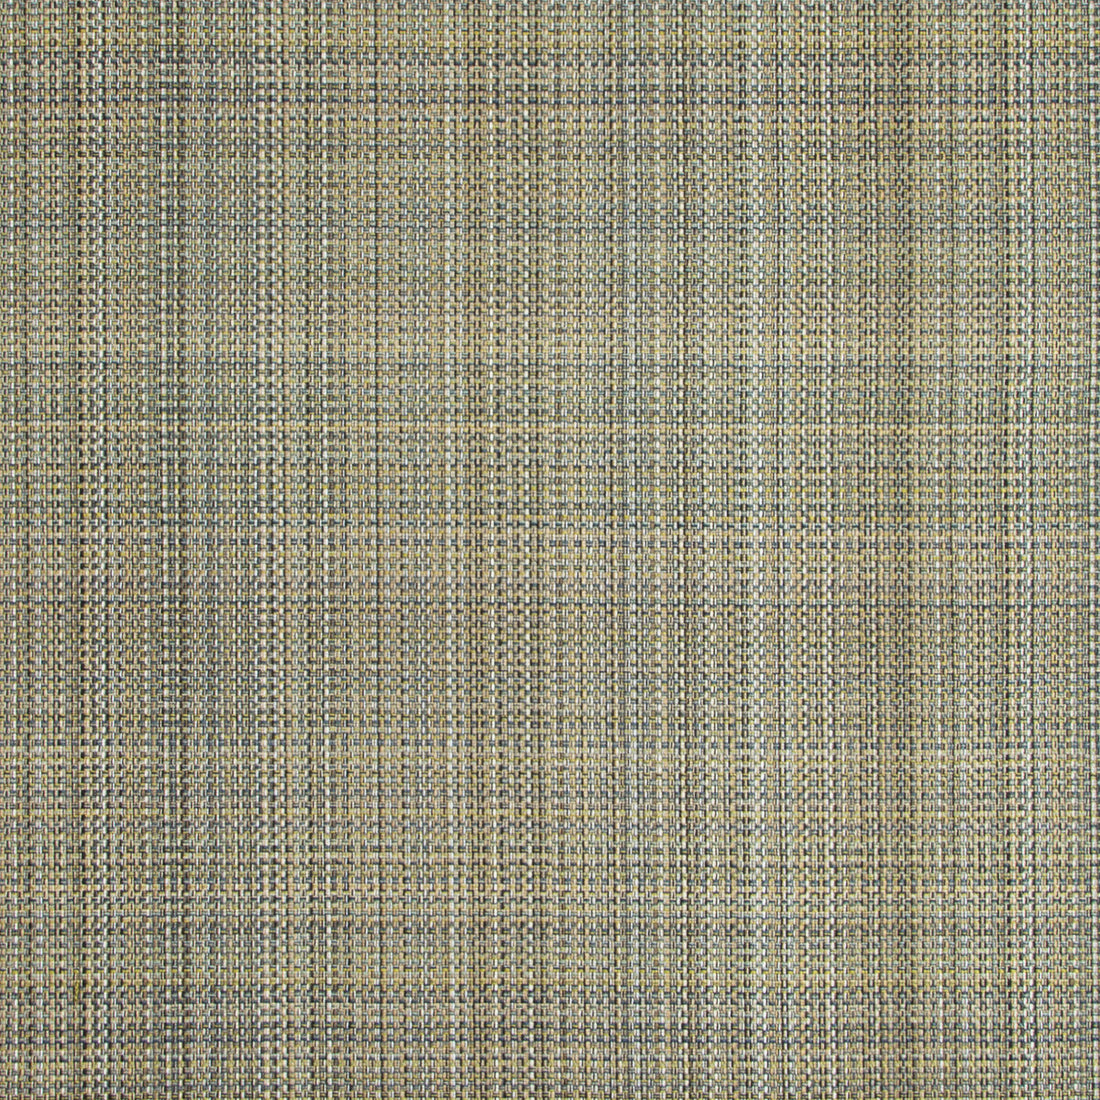 Tailor Made fabric in cerulean color - pattern 34932.513.0 - by Kravet Couture in the Modern Tailor collection